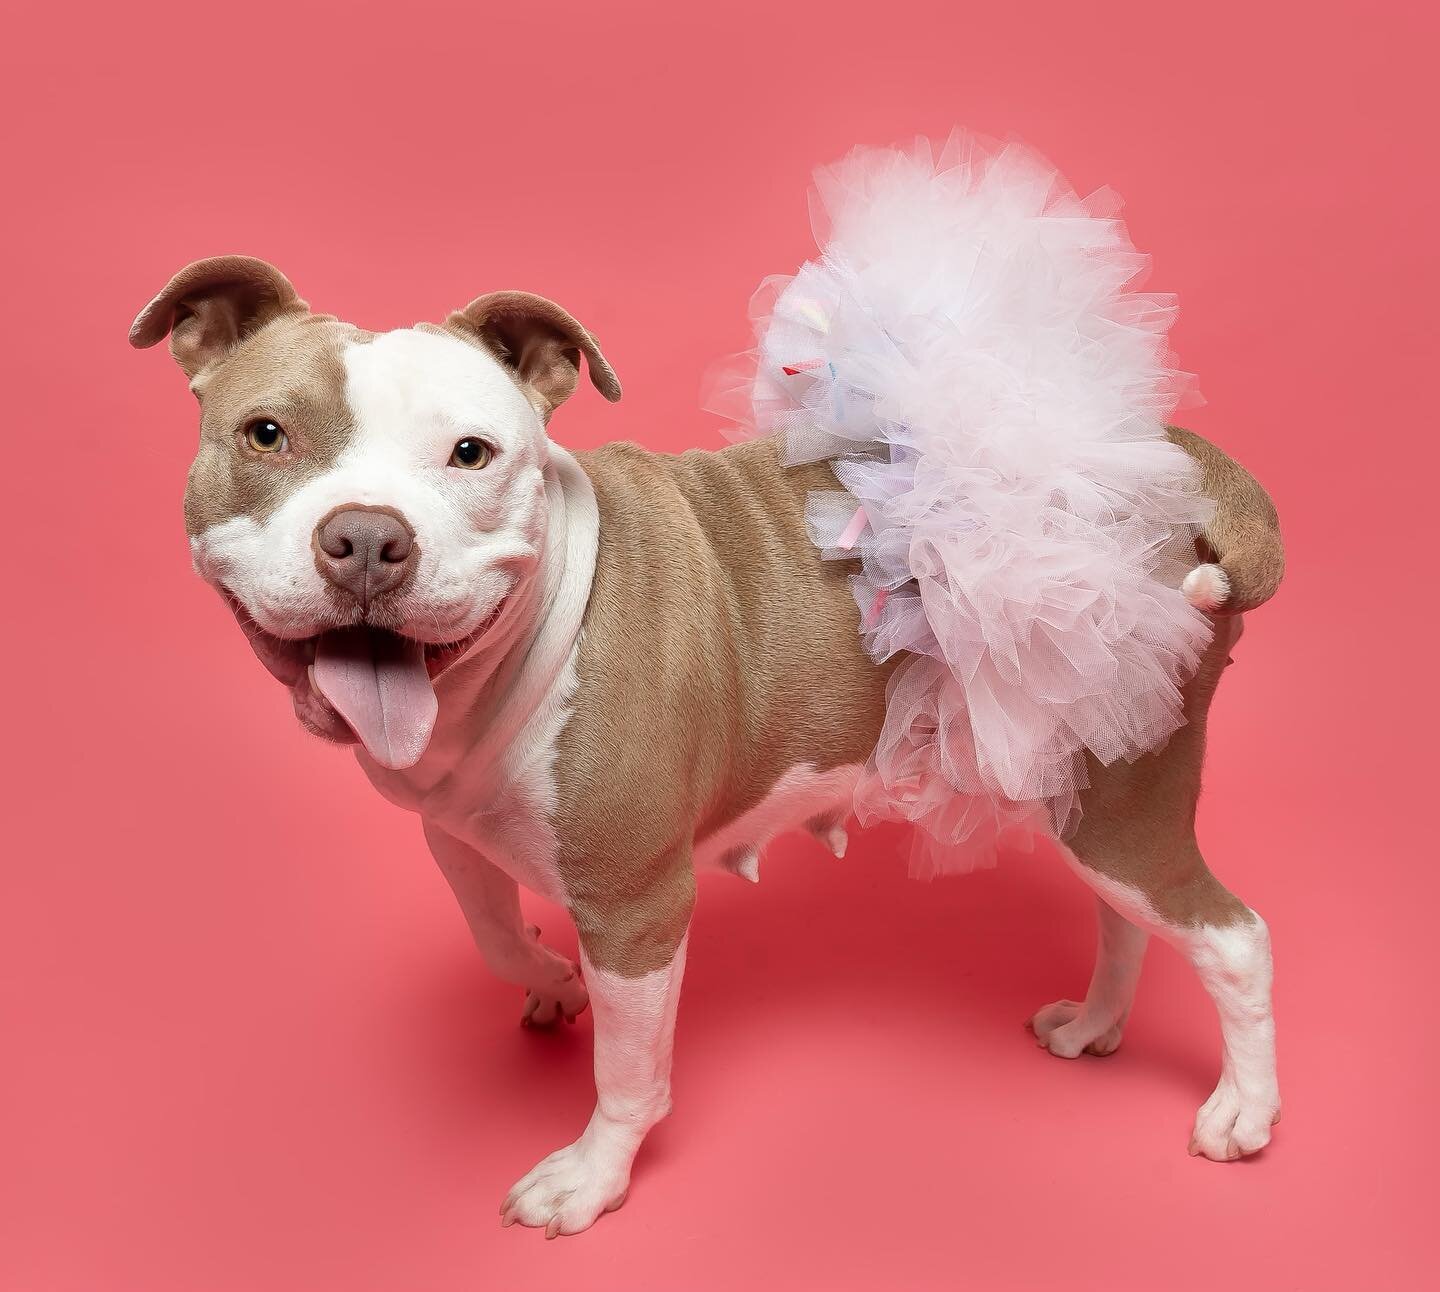 We interrupt today&rsquo;s feed to bring you a velvet hippo in a tutu&hellip;

&hellip;you&rsquo;re welcome&hellip;